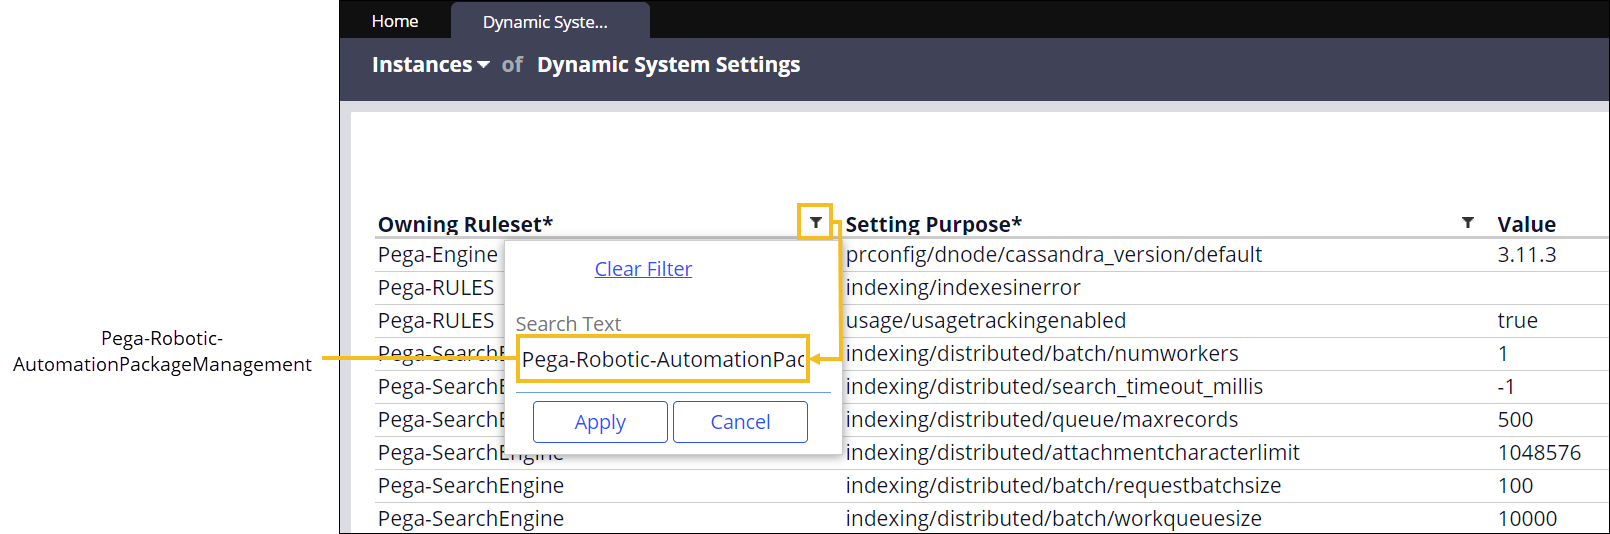 Filtering the dynamic system settings by using the Pega Robotic Automation Package Management owning ruleset.